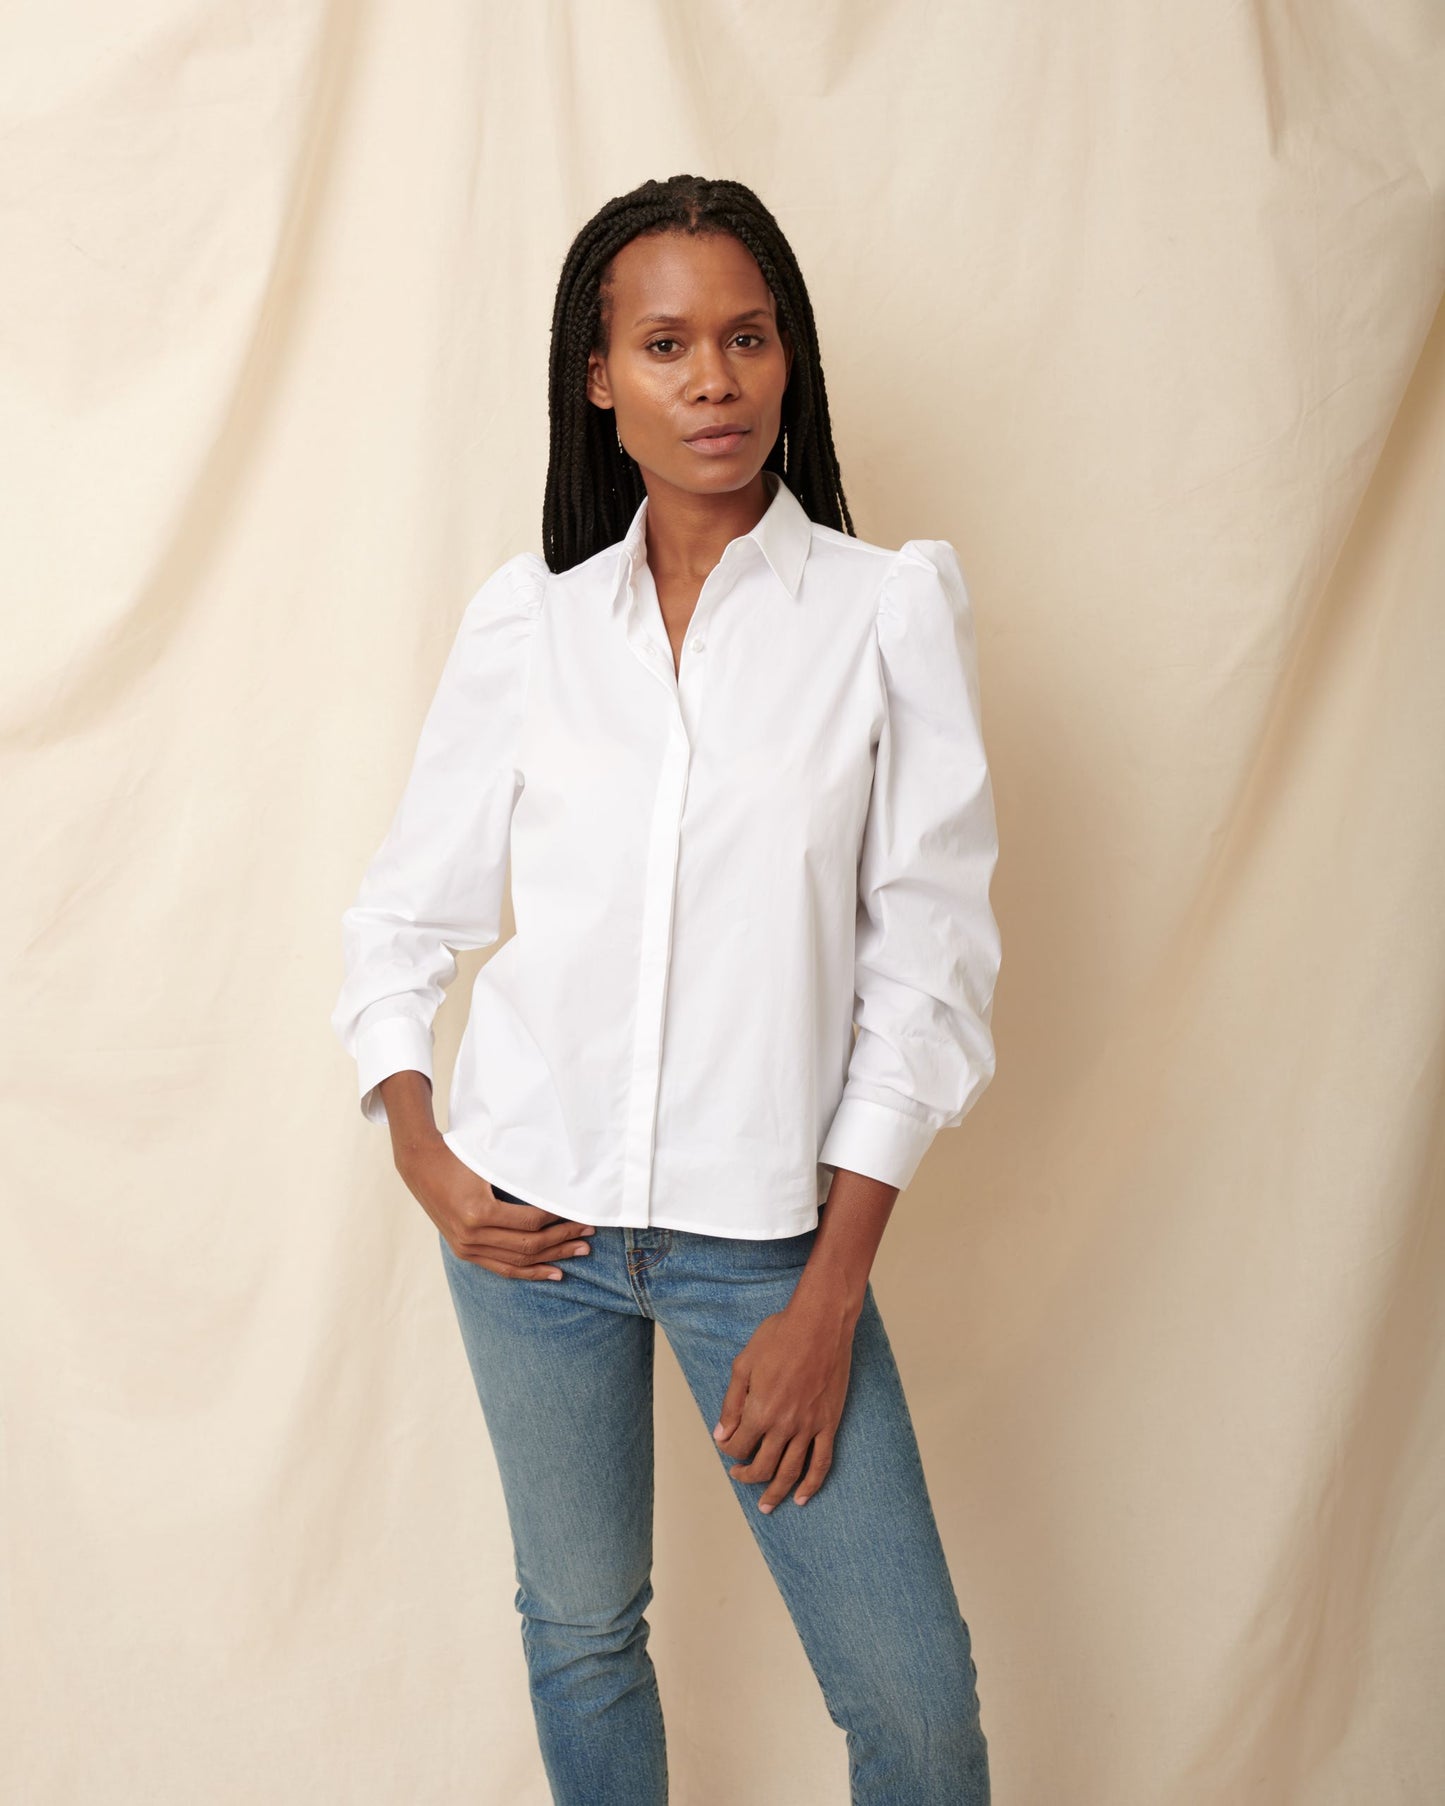 Black, fuller bust model pairing white cotton puff sleeve button down with blue jeans